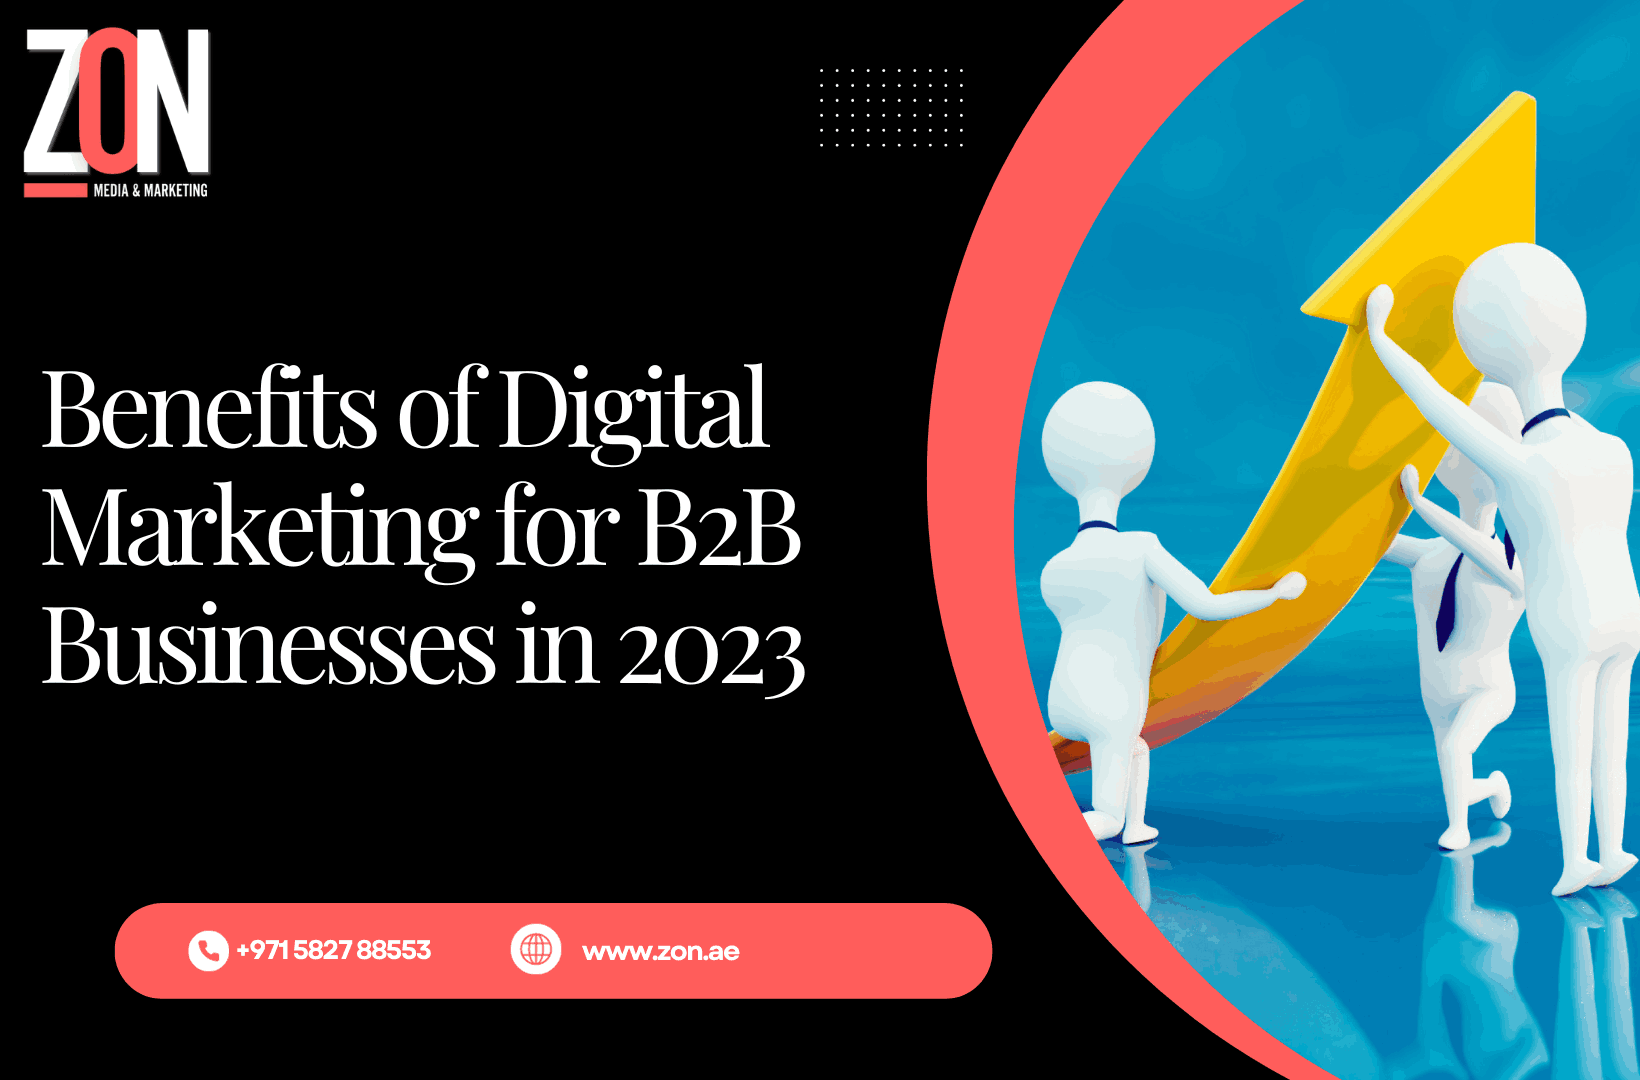 Benefits of Digital Marketing for B2B Businesses in 2023